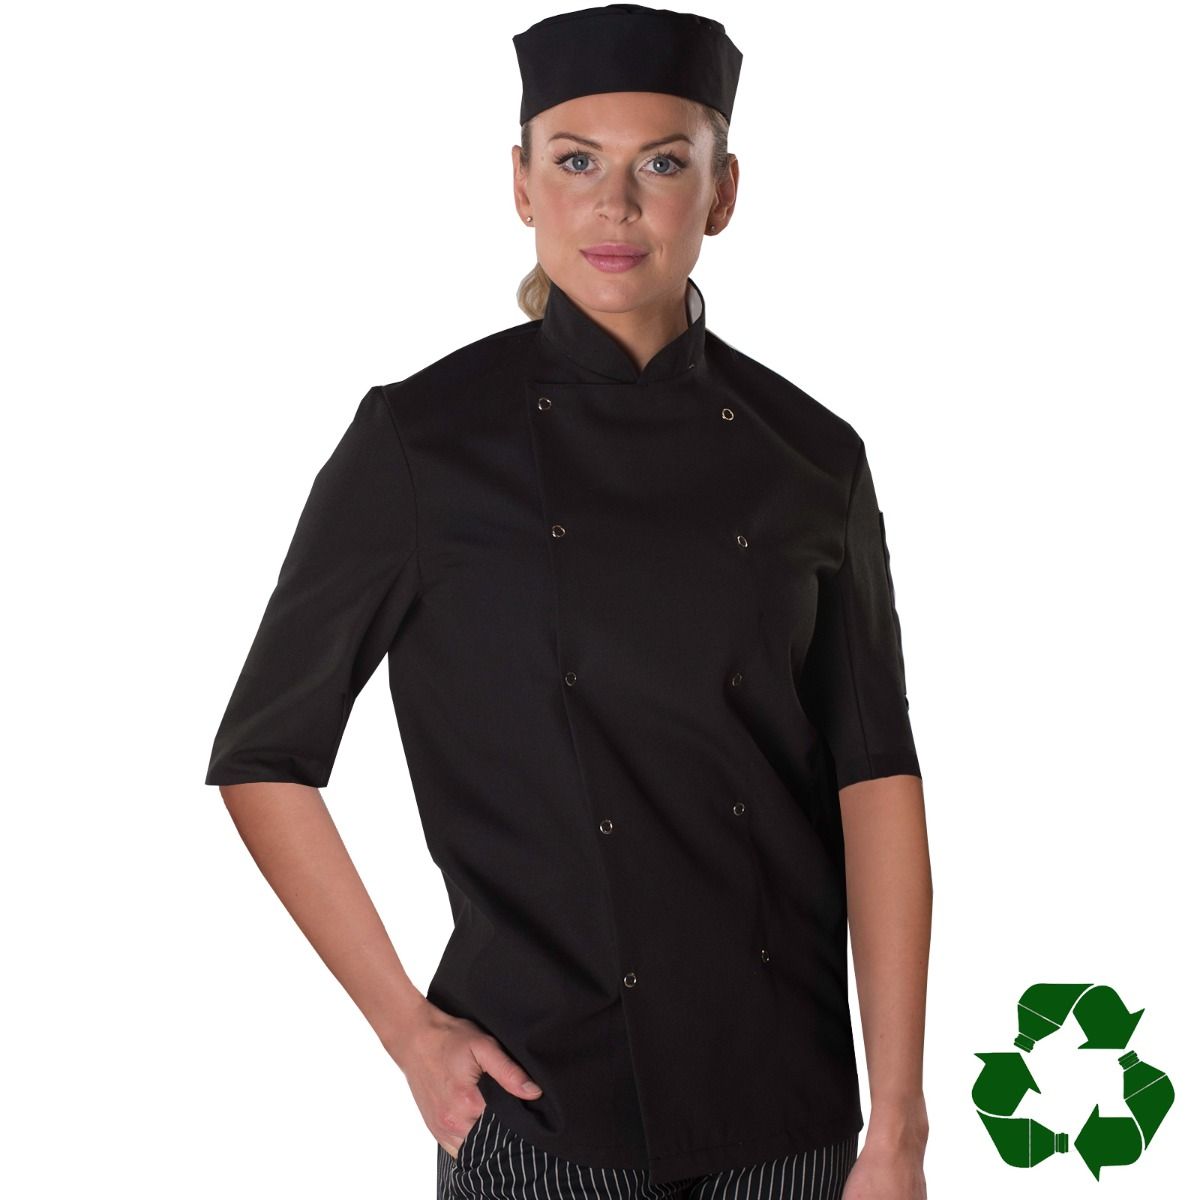 Recycled Short Sleeve Chefs Jacket